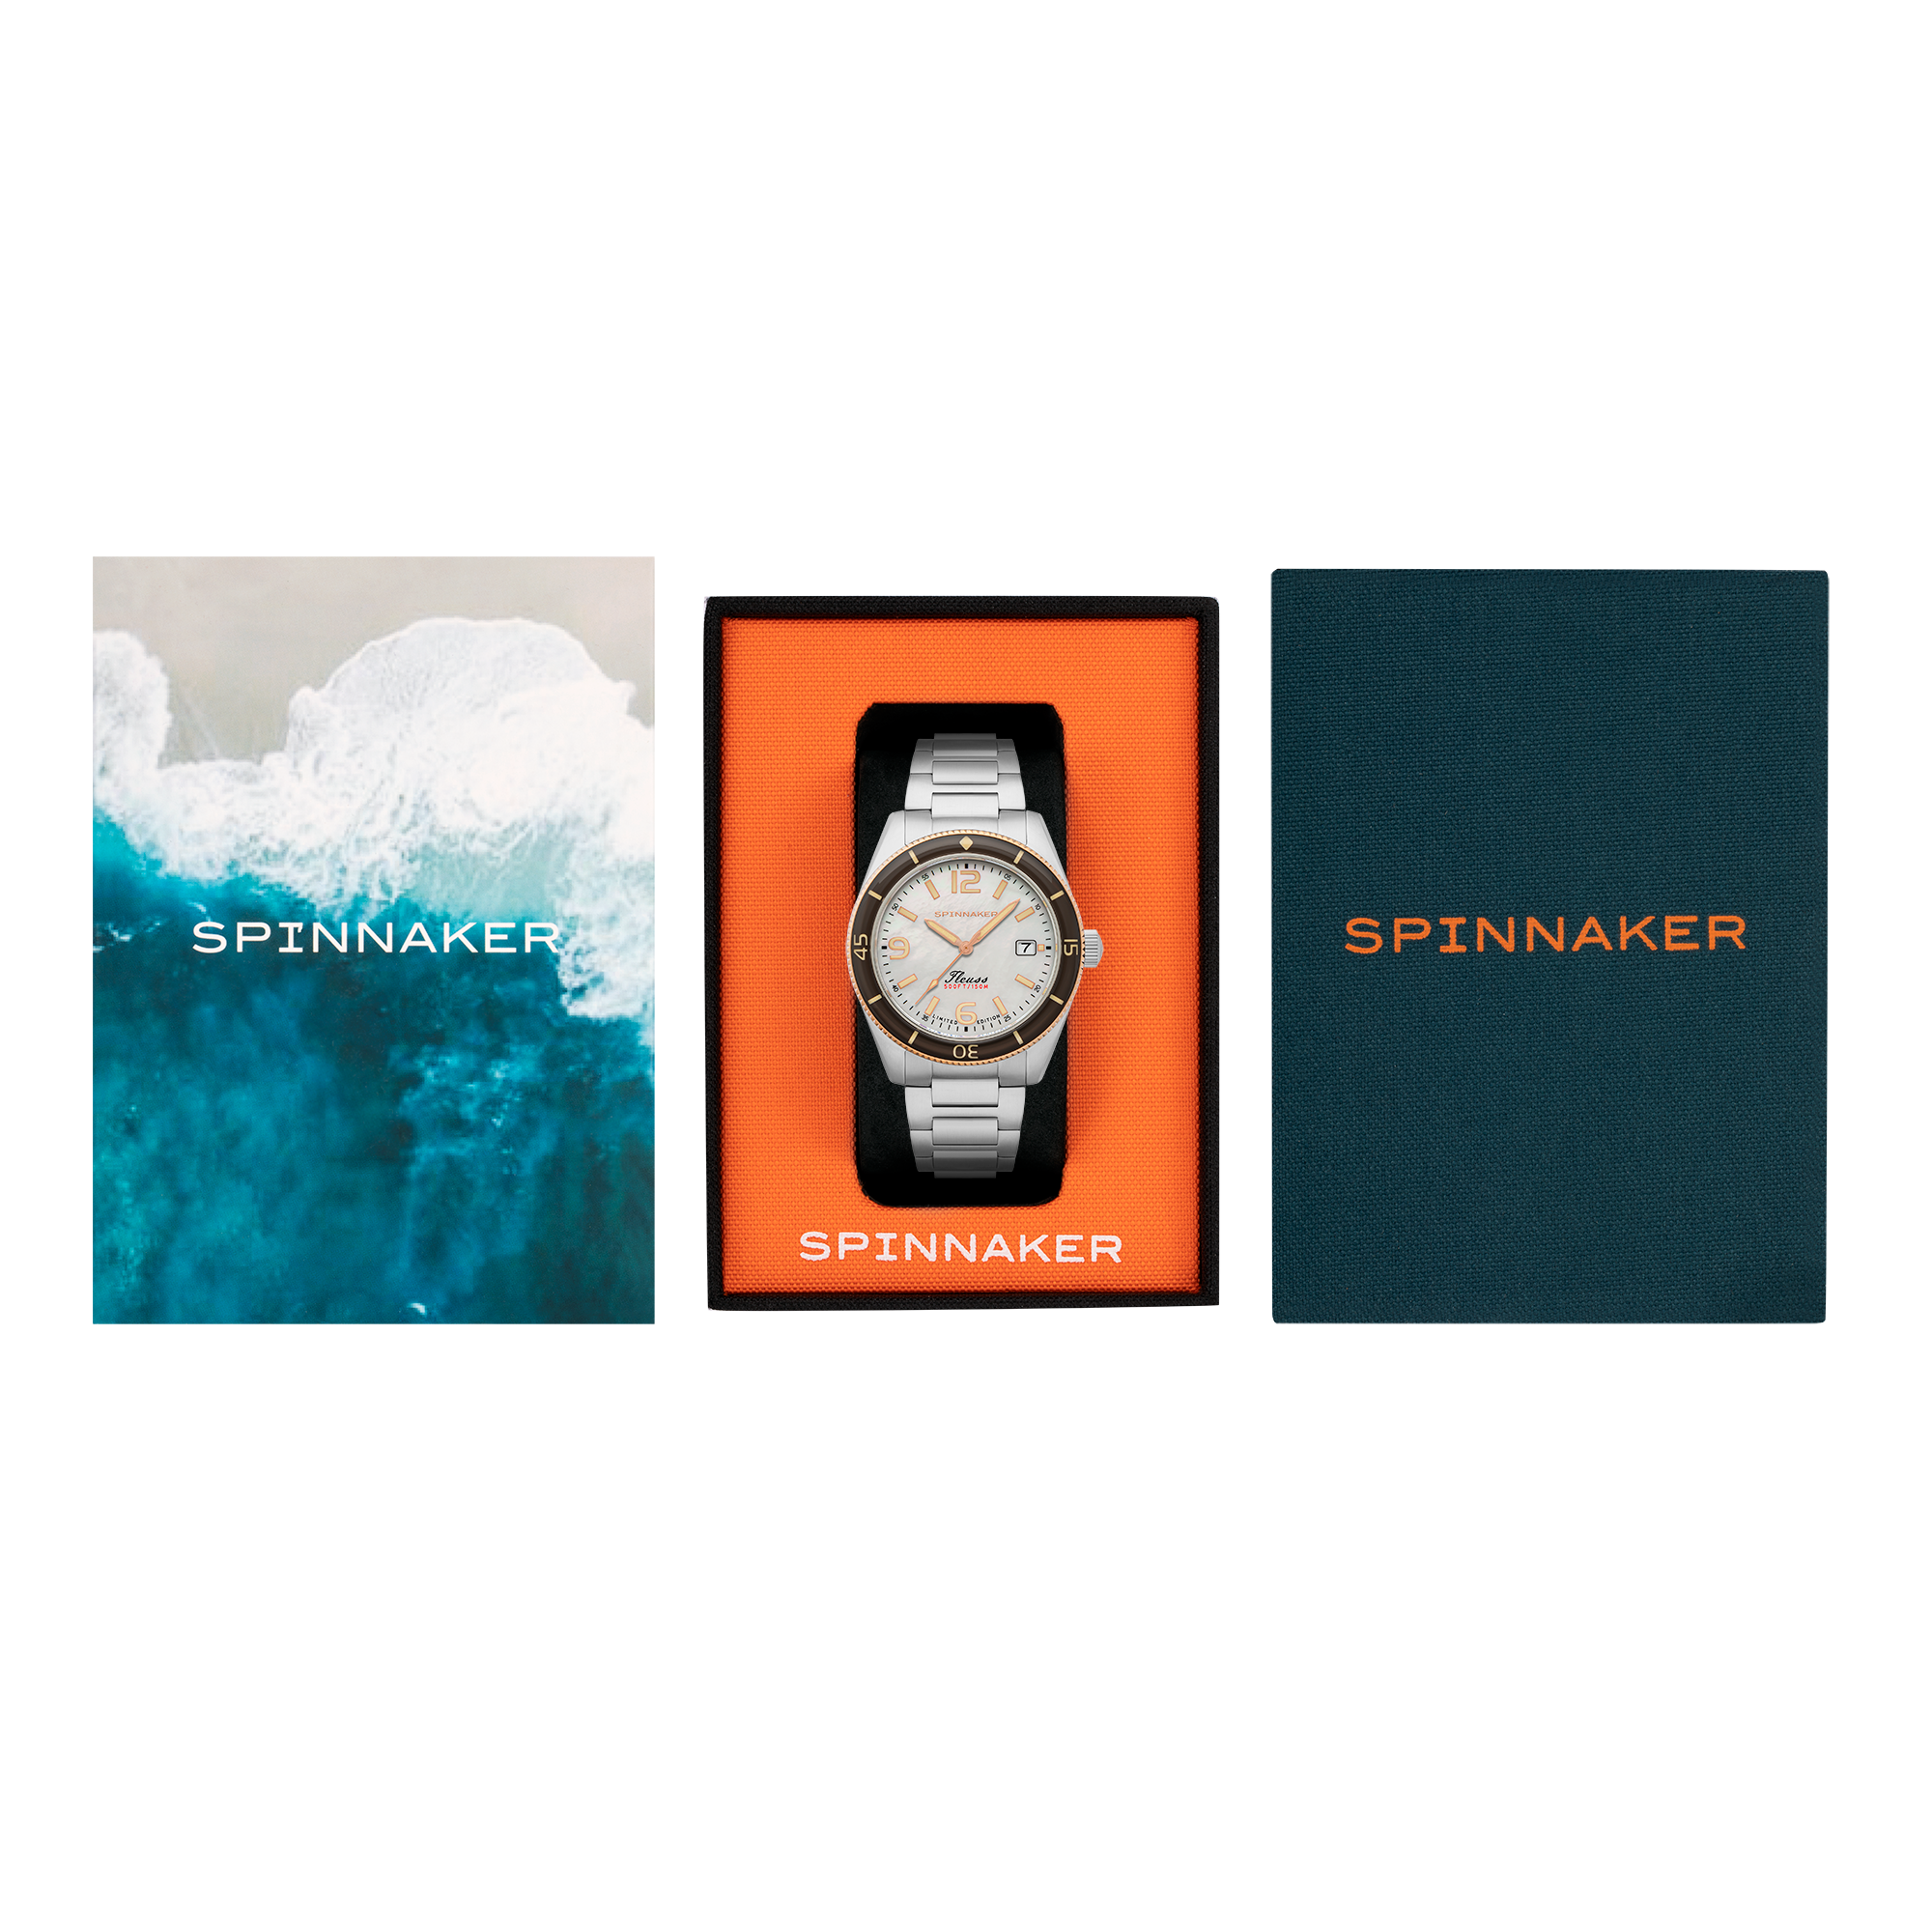 Spinnaker Spinnaker Fleuss Automatic White Pearl Diver Limited Edition Men's Watch SP-5108-33